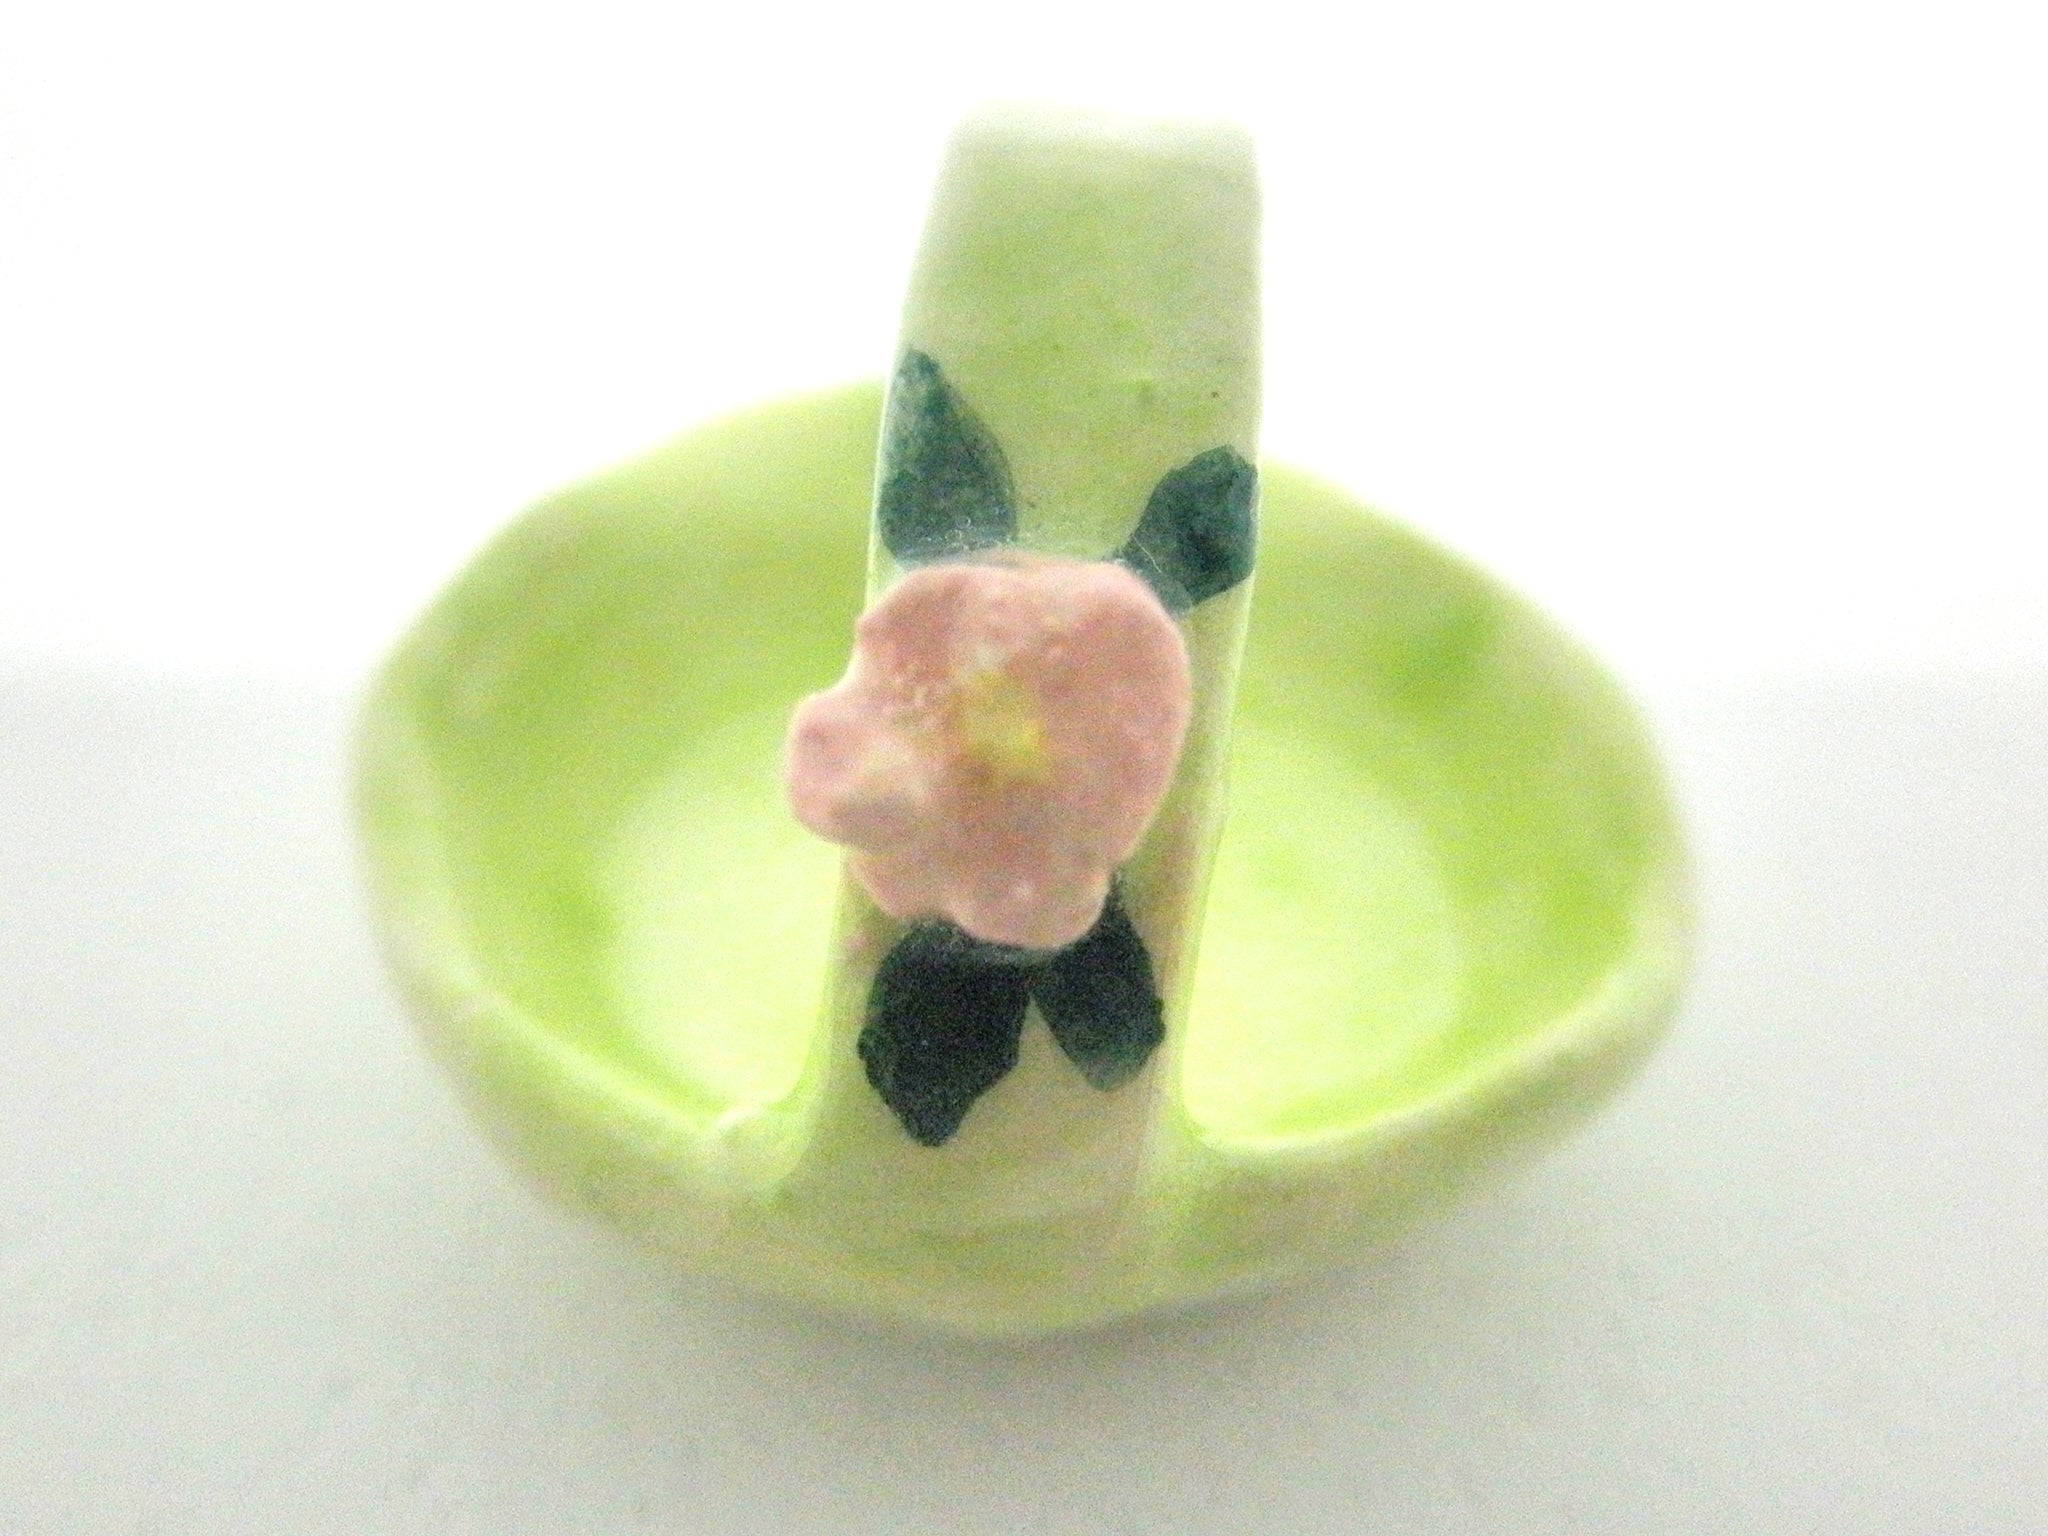 Dollhouse miniature ceramic Easter basket light green with rose